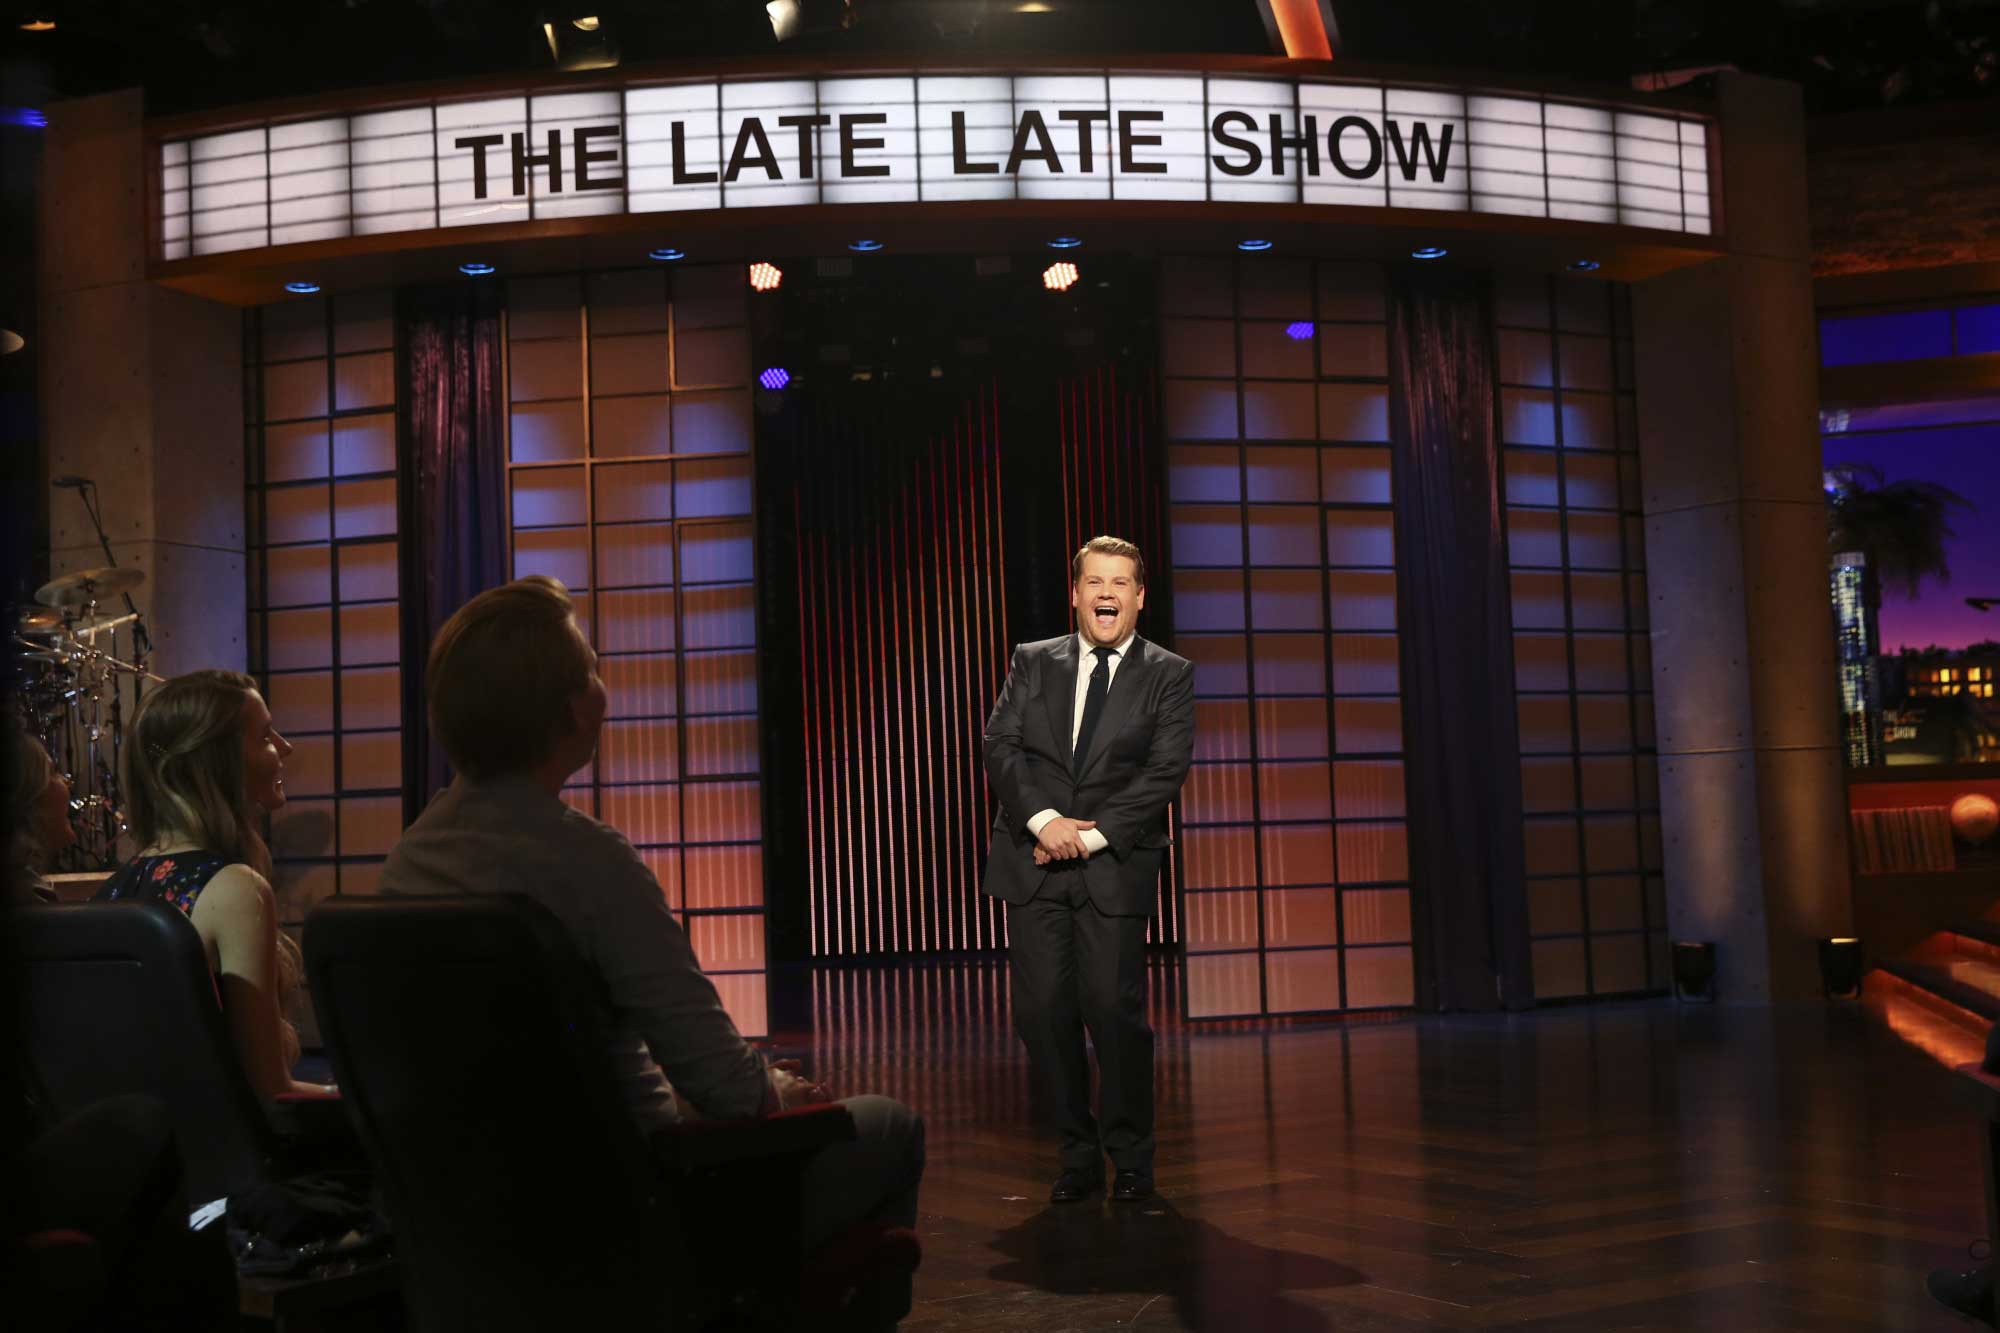 James Corden steps on stage for the first episode of "The Late Late Show with James Corden," in Los Angeles on March 23, 2015. (Monty Brinton–CBS/Getty Images)